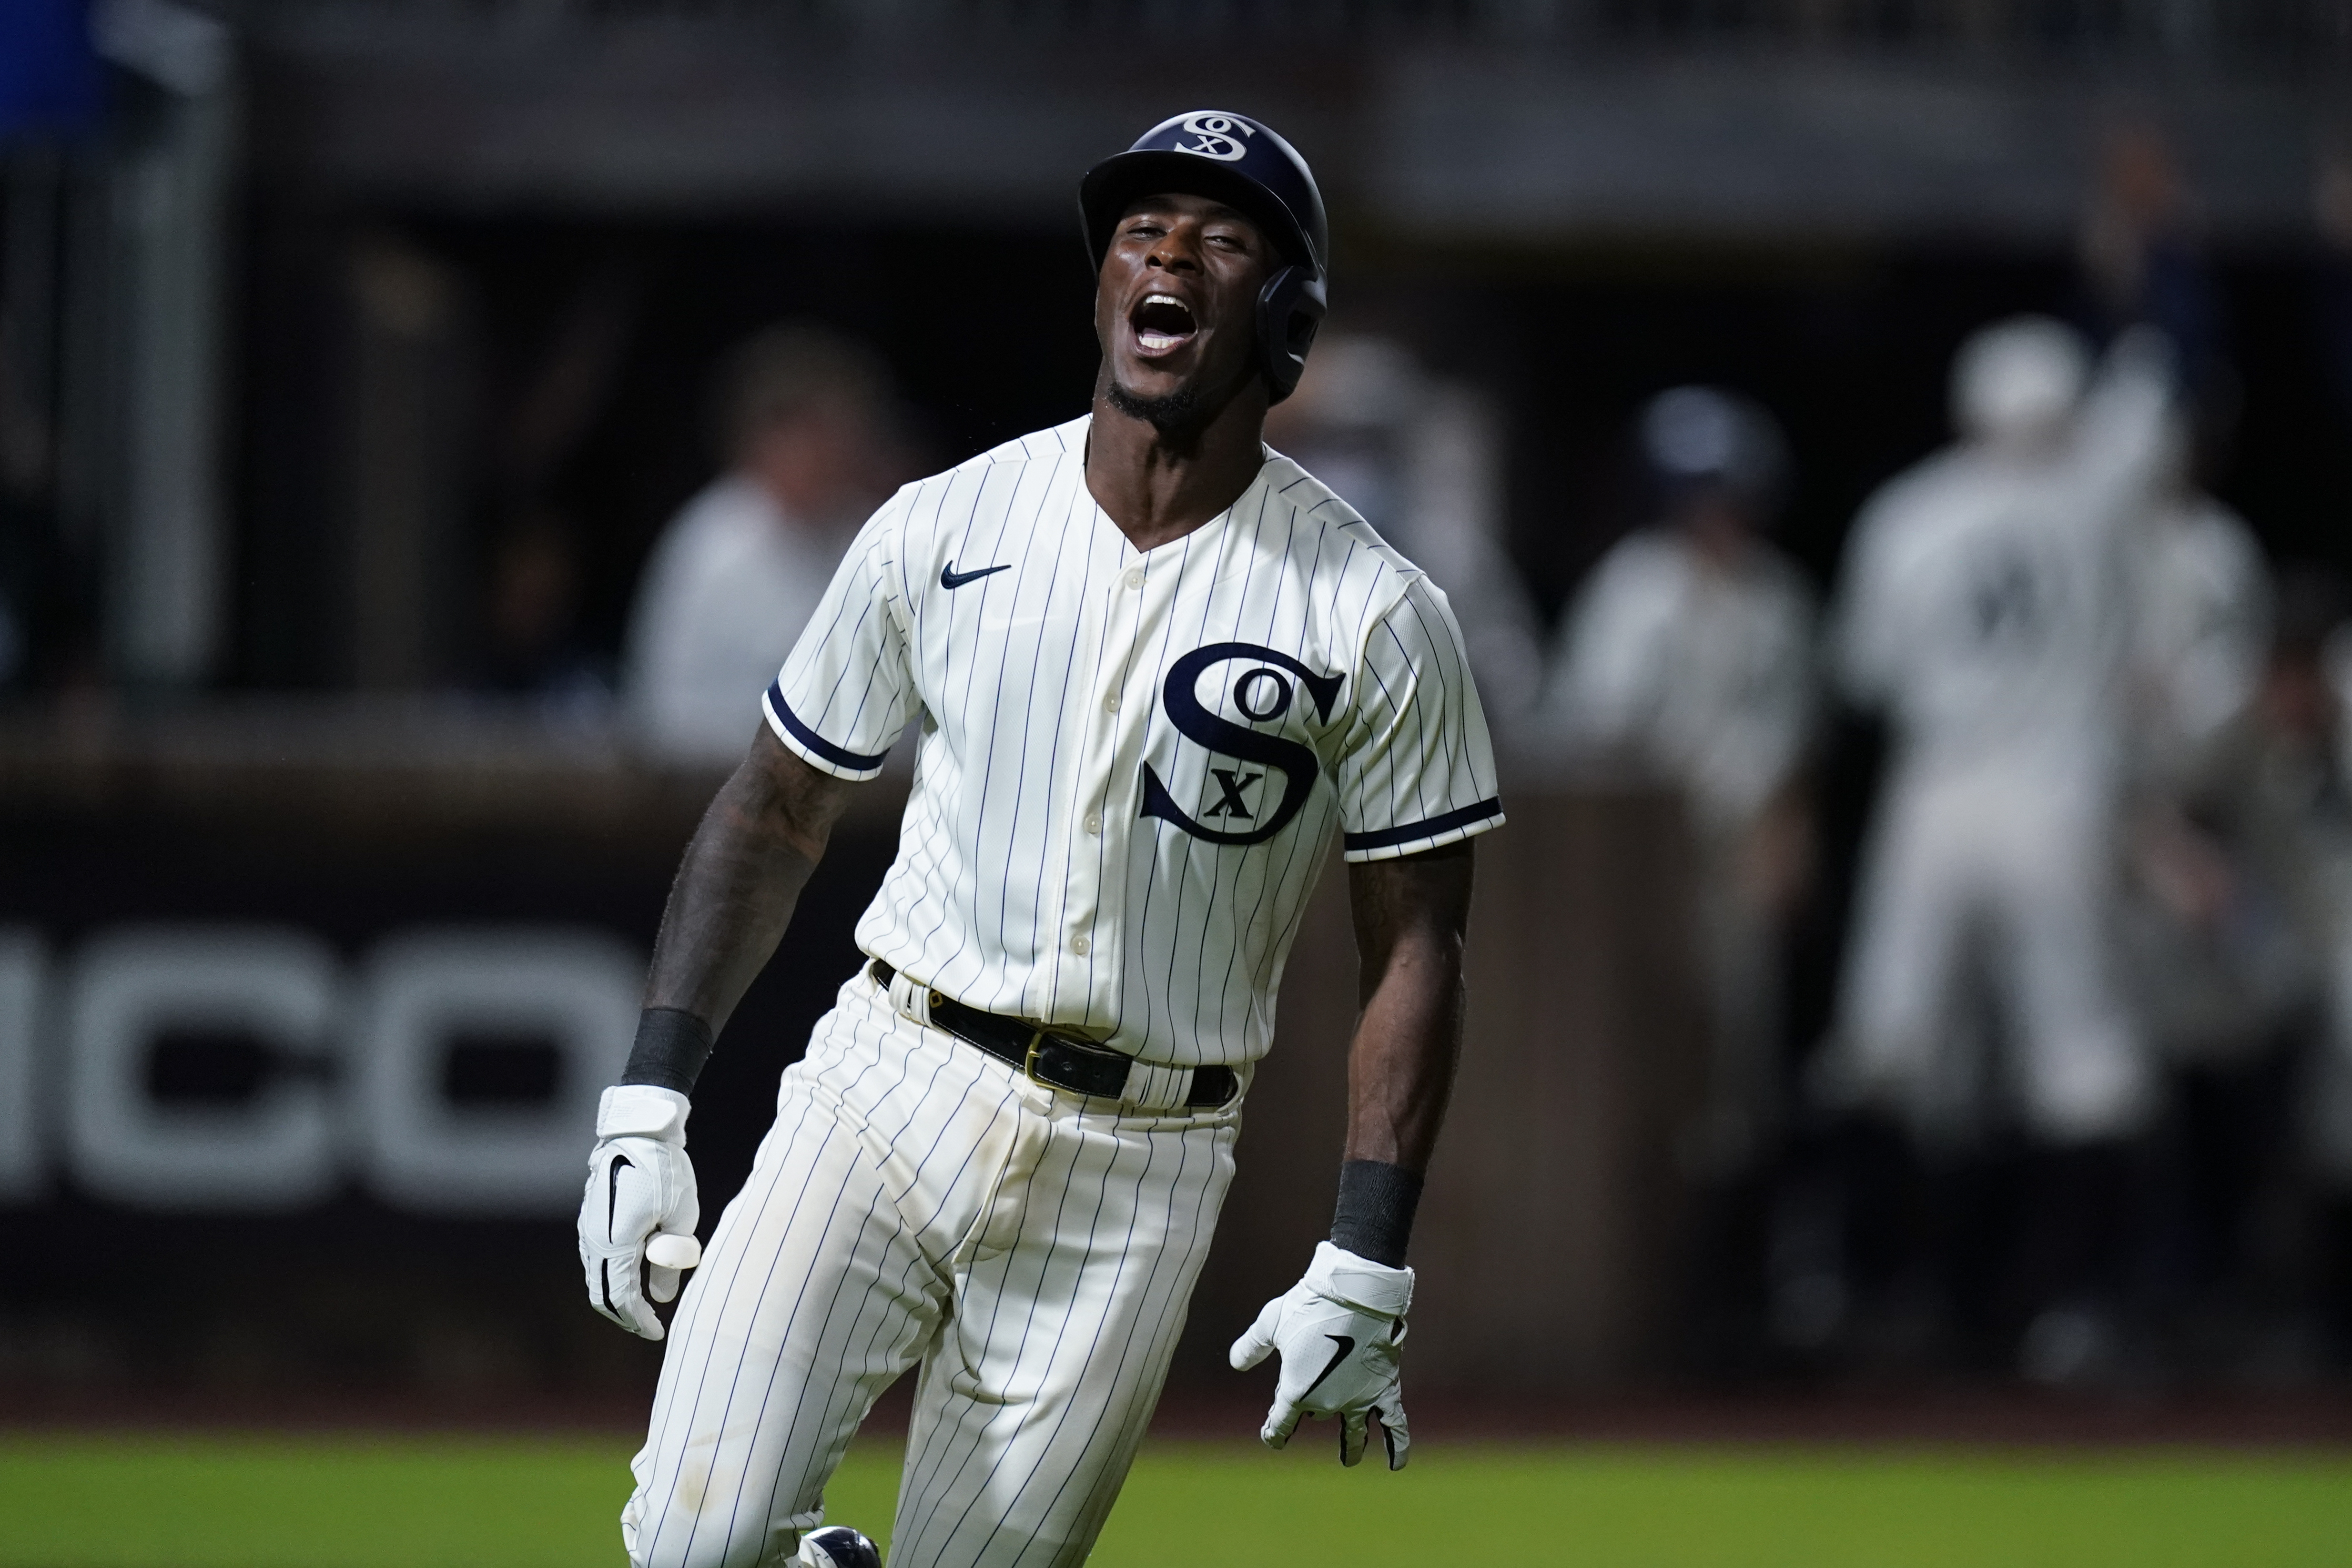 Tim Anderson hits first career walk-off home run